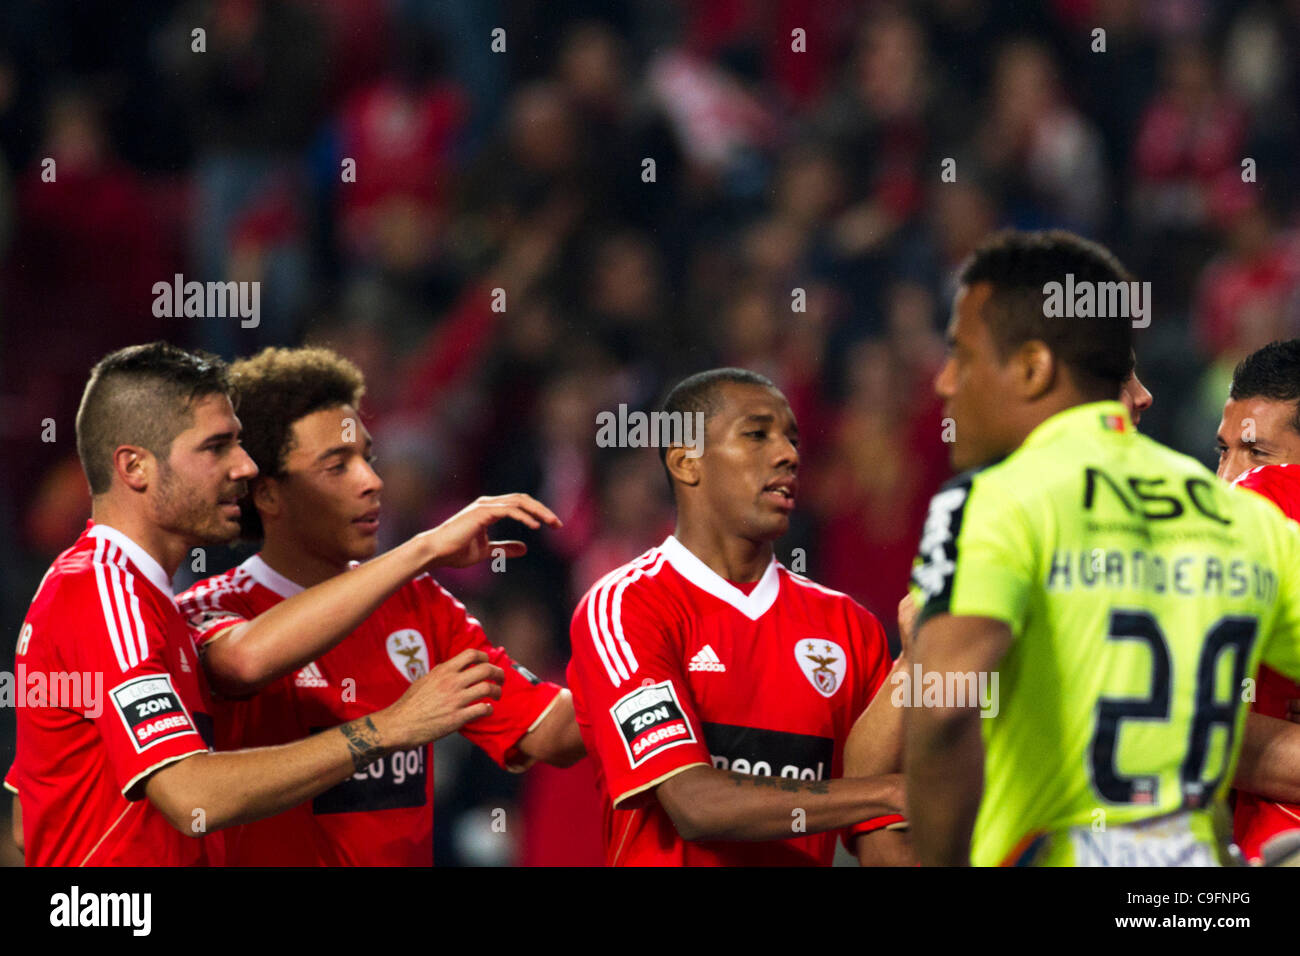 Portugal Liga Zon Sagres 13rd round - SL Benfica (SLB) x Rio Ave FC (RAFC)  Benfica players celebrating their 4 goal near Huanderson Rio Ave FC Goalkeeper. Stock Photo